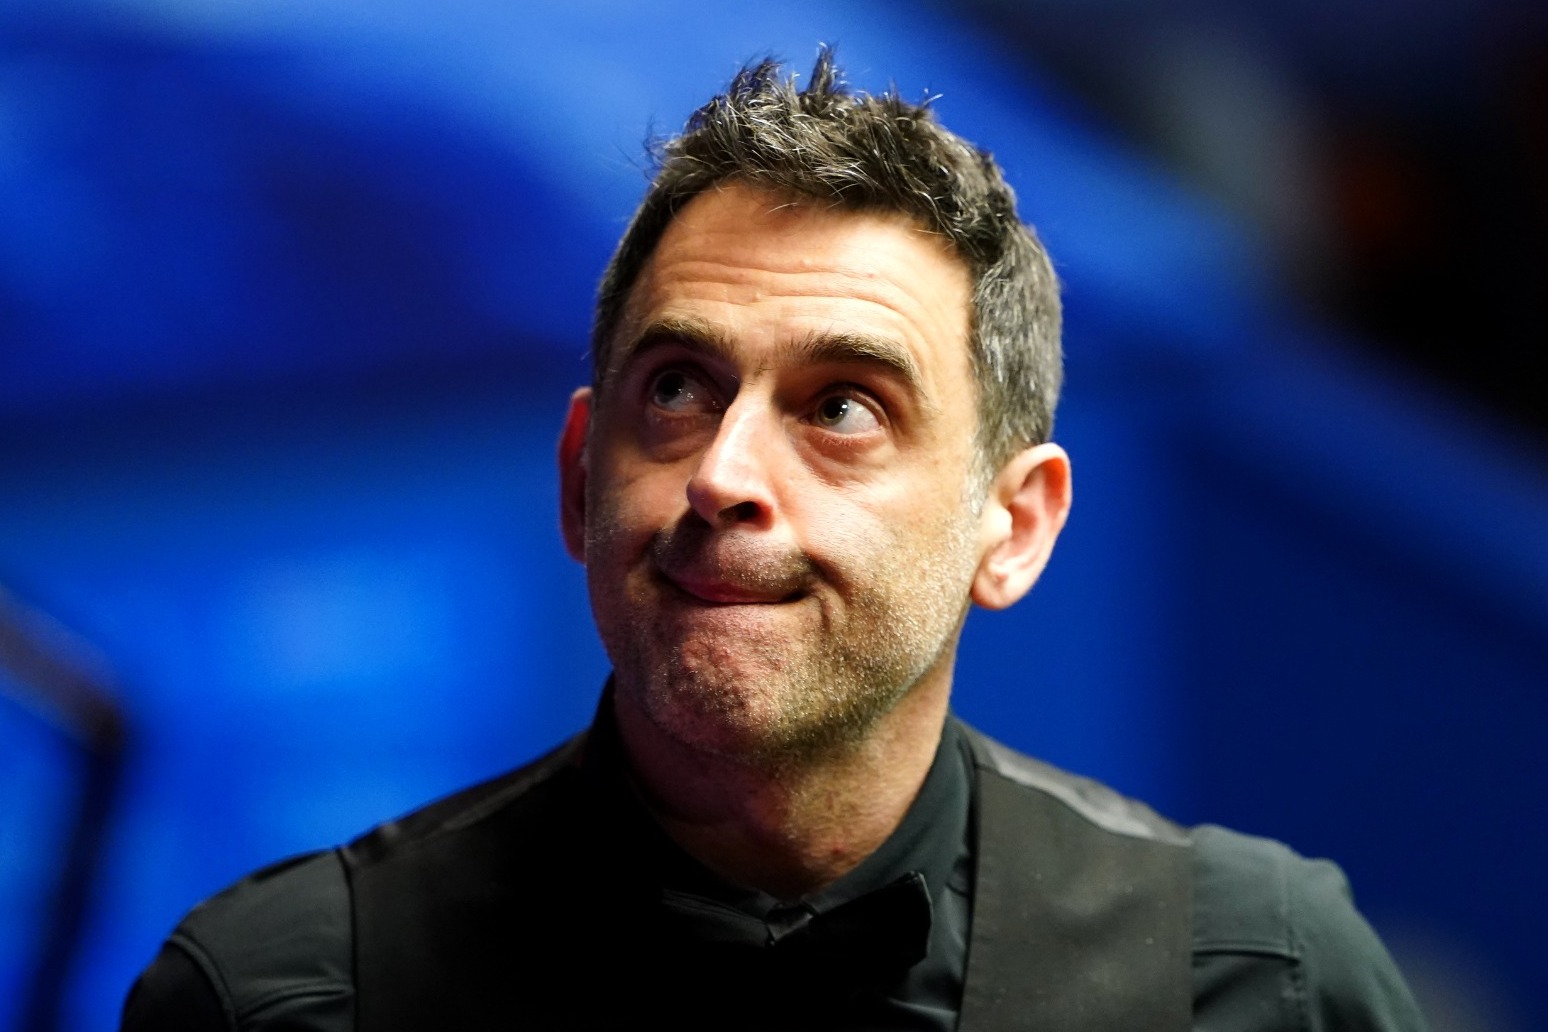 Ronnie OSullivan could be sanctioned after appearing to make lewd gesture